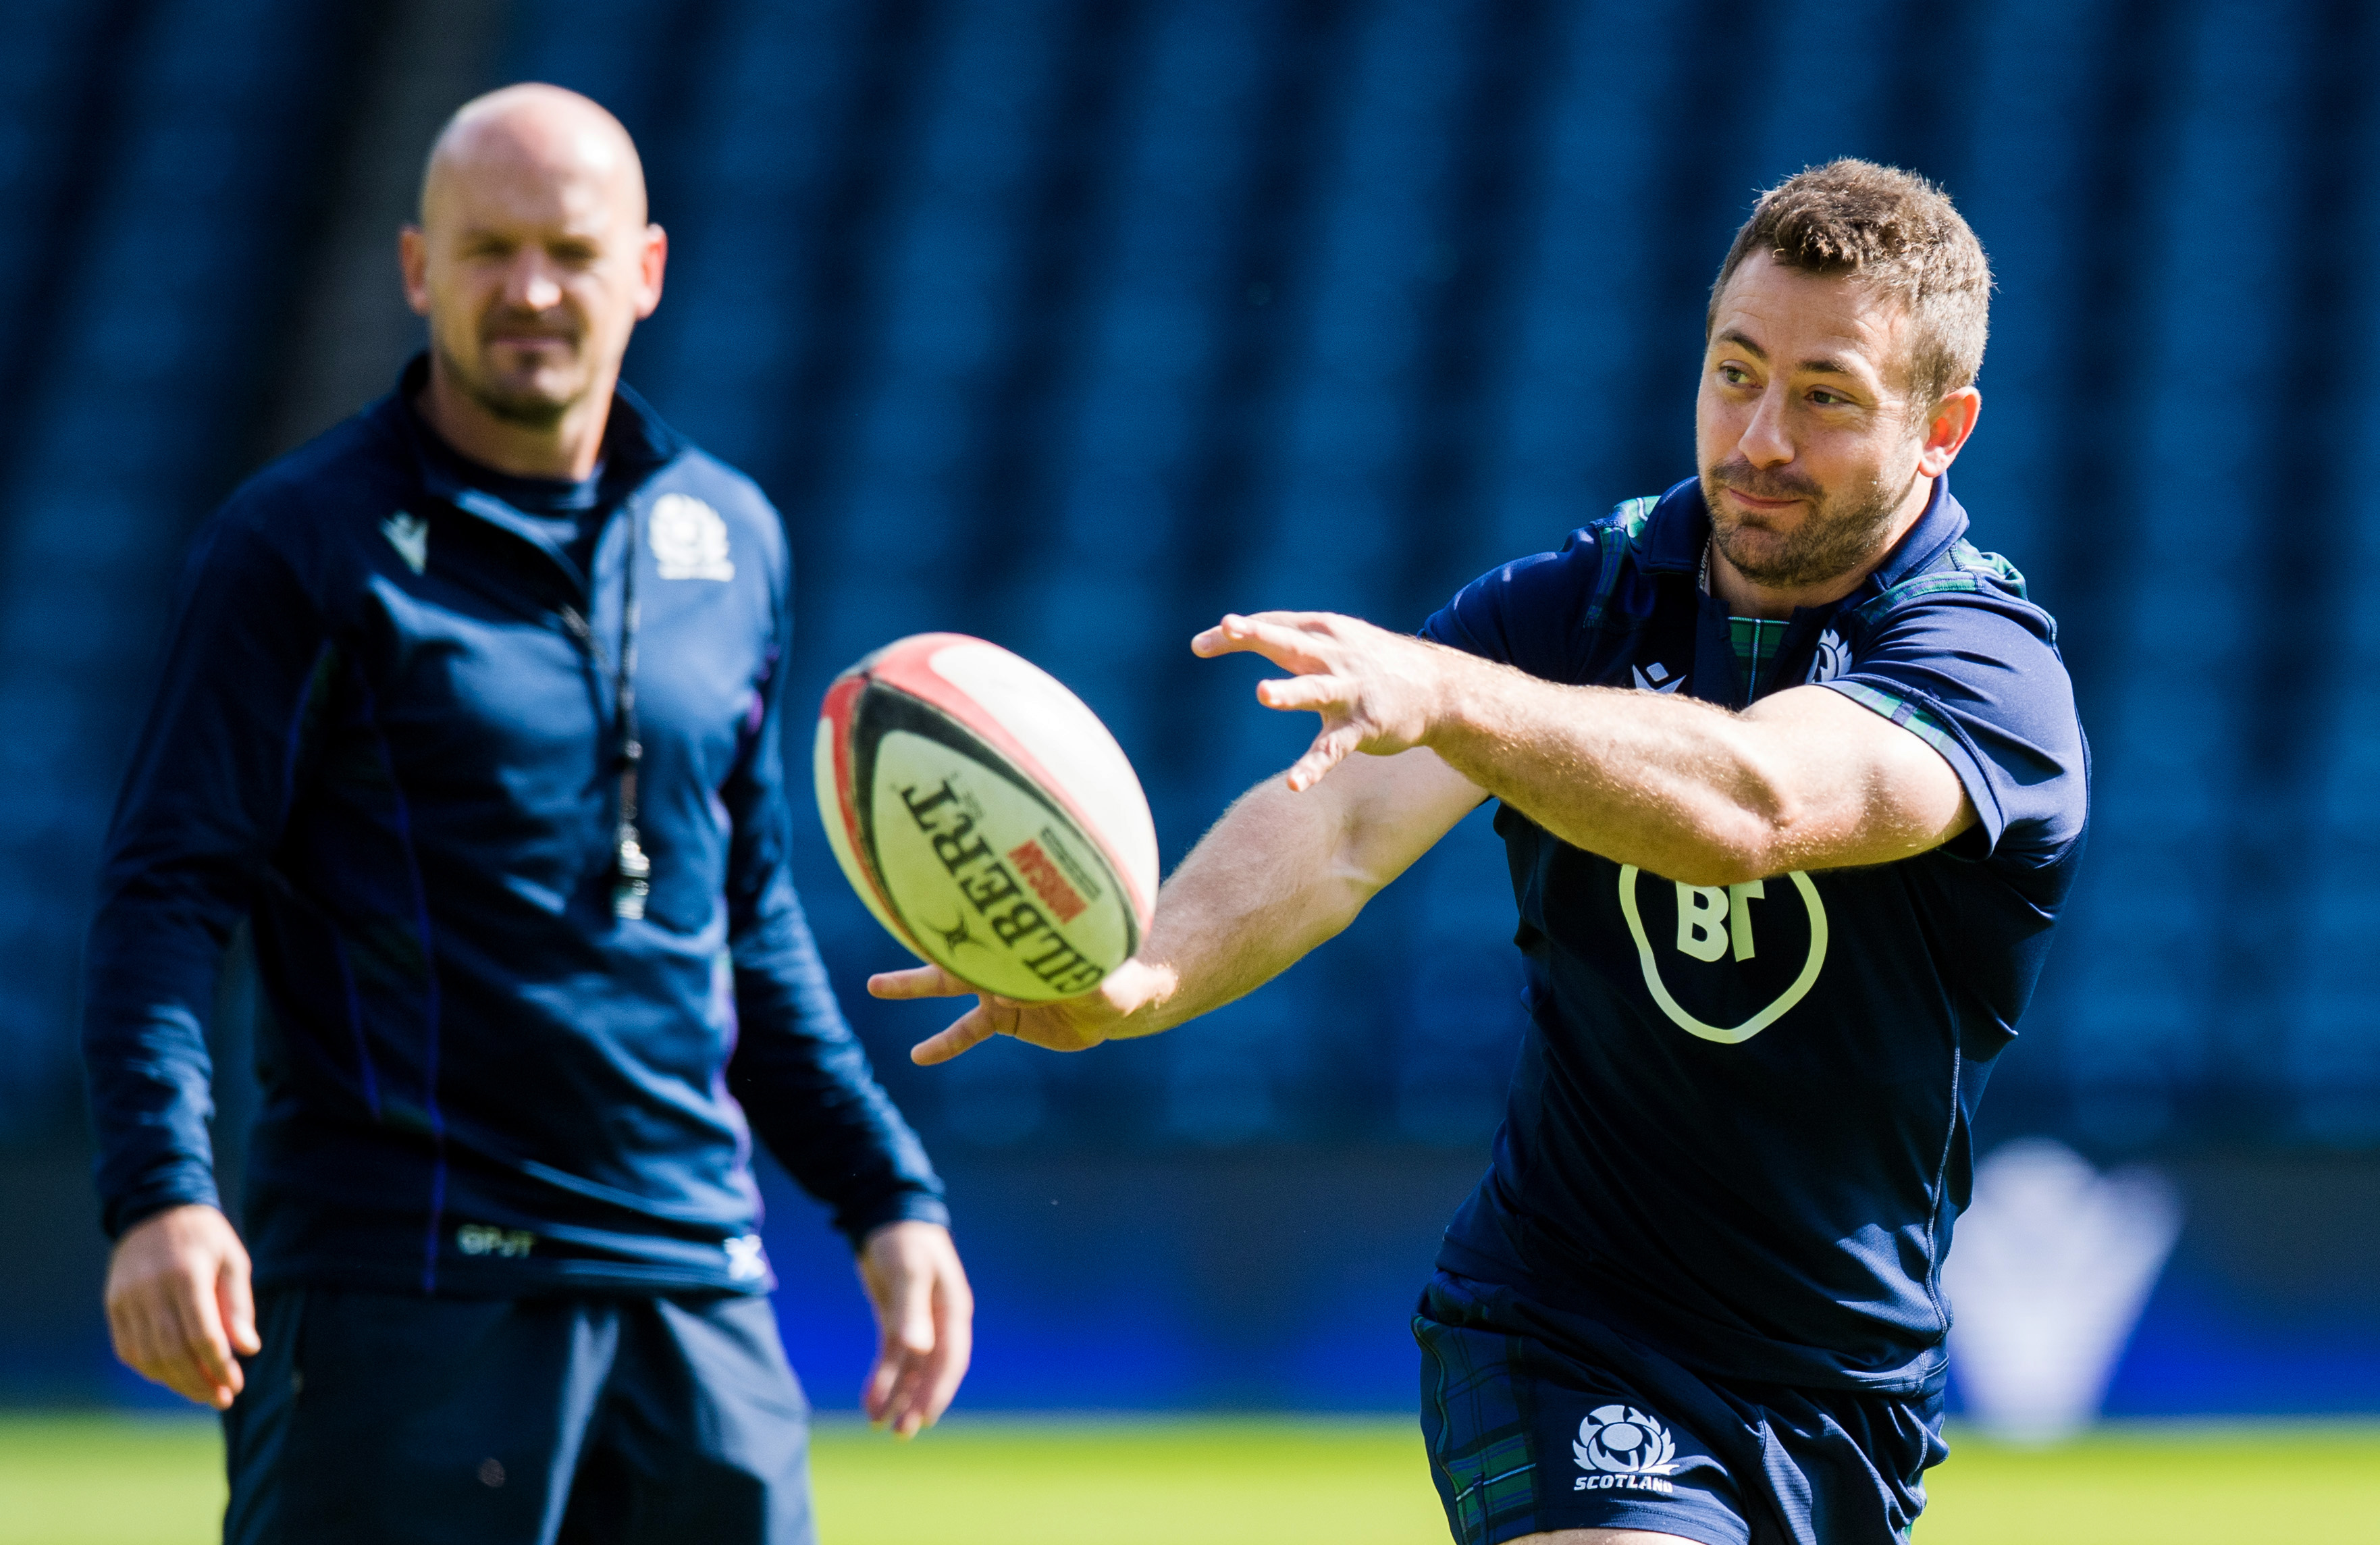 Greig Laidlaw leads the captain's run at Murrayfield under the watchful eye of head coach Gregor Townsend.